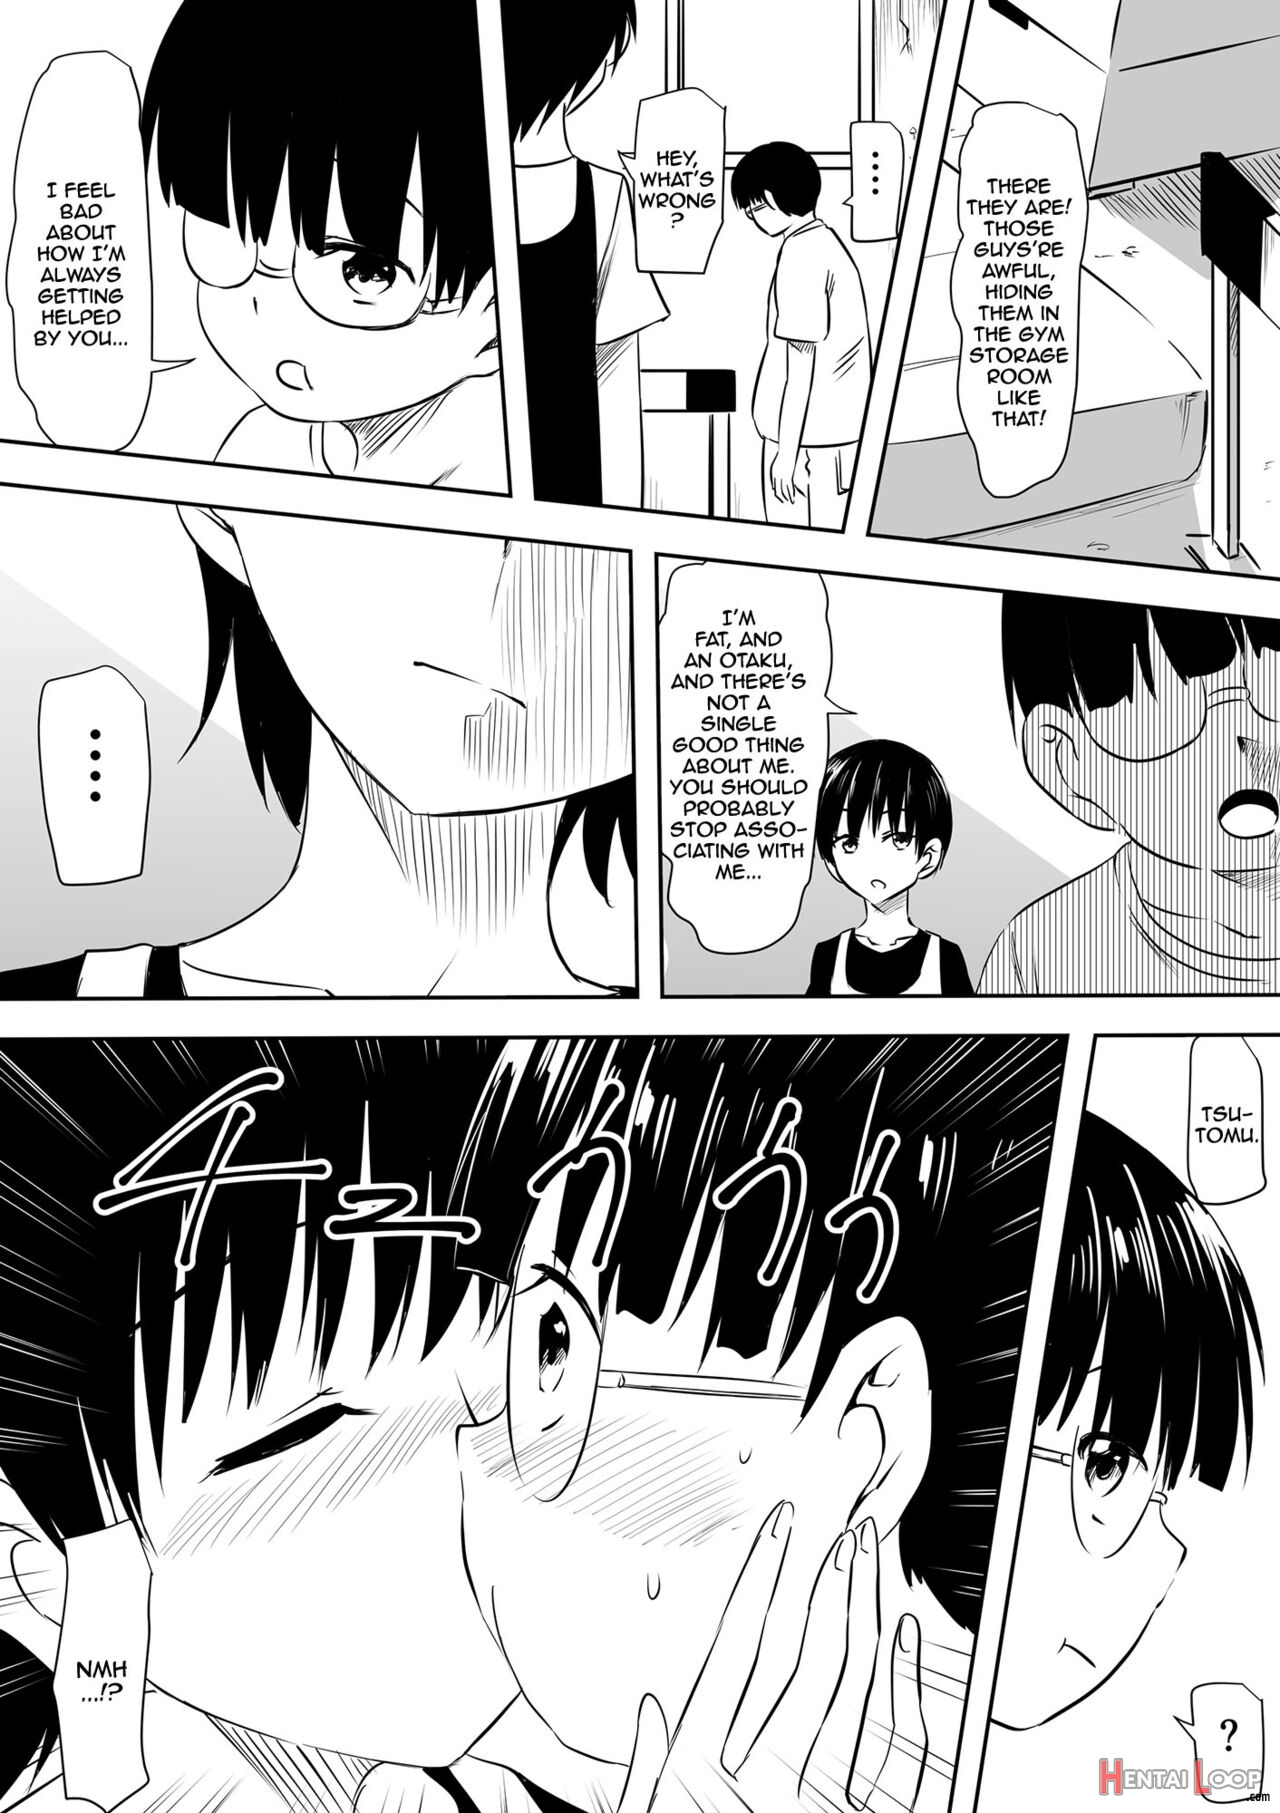 Development Records Of An Asocial Otaku And A Brown Tomboy Going At It Over And Over page 4